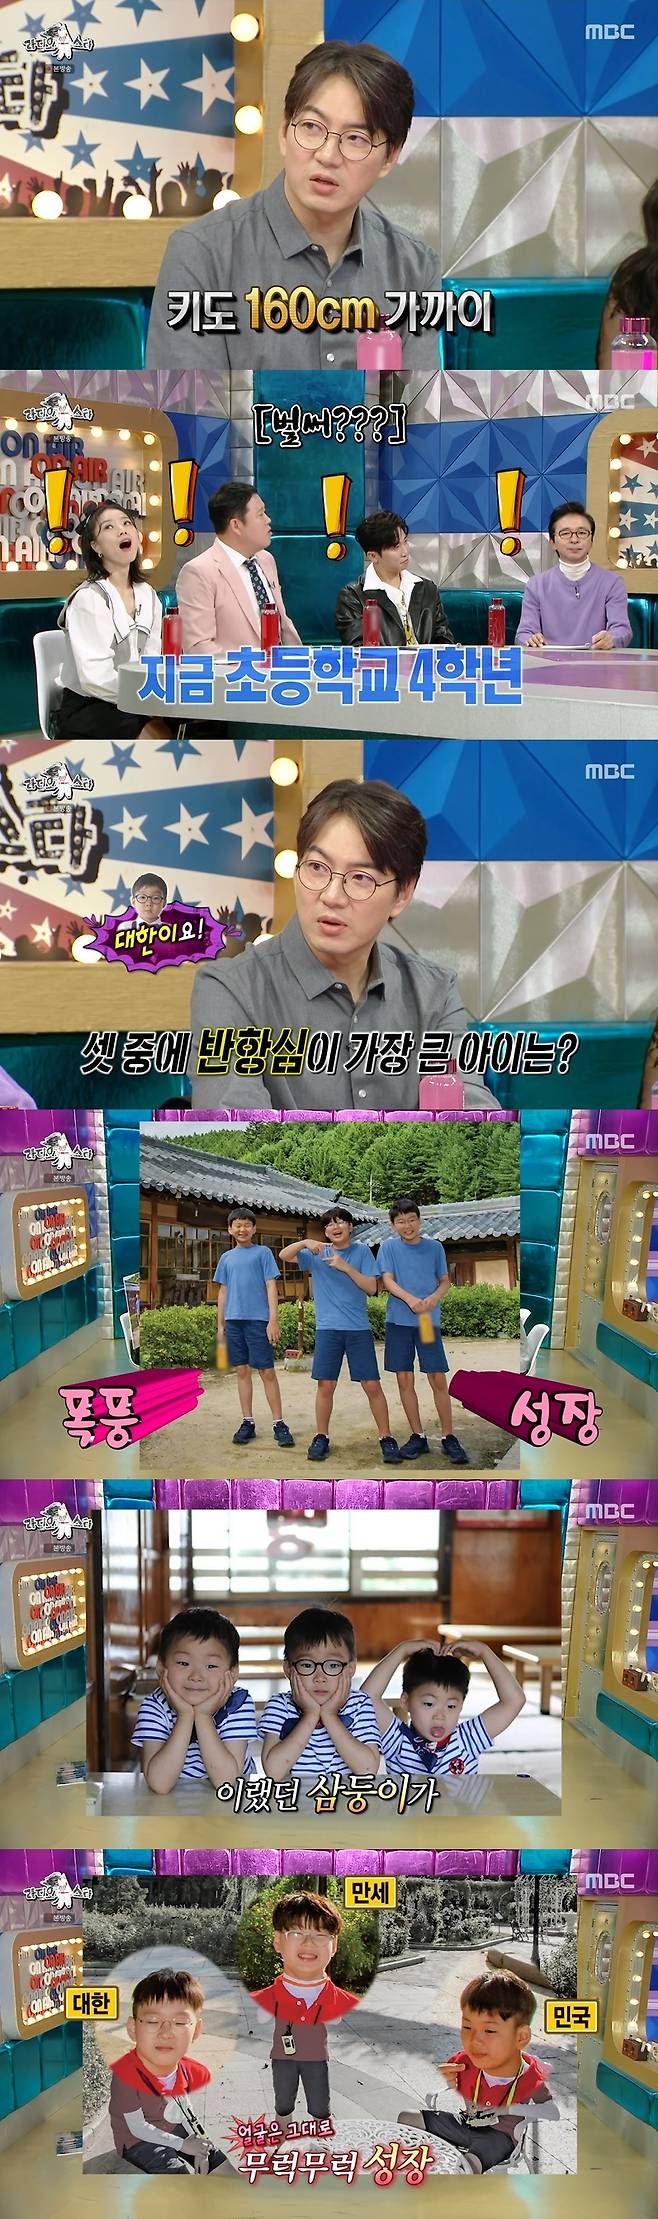 Seoul =) = Song Il-gook told about Three Twins.In the MBC entertainment program Radio Star broadcasted on the afternoon of the 16th, actor Song Il-gook appeared and surprised the news of three twin sons Korea, Republic of Korea and hurray.On this day, Song Il-gook was curious about the Three Twins because of the play with his fellow actor Bae Hae-sun. At that time, I was trying very hard to have a child.It happened as soon as the performance was over. Everyone was surprised when he explained the reason.MCs were curious about the status of the Three Twins and asked, How big are you now? Song Il-gook said, Im in the fourth grade of elementary school now. My feet are already 265mm in size. Im nearly 160cm tall.Gim Gu-ra said, Hasnt the puberty come? Song Il-gook said, I wanted to talk to you anyway, as if he had waited, referring to him as the most rebellious of the three.Gim Gu-ra said, It seems that the Korean is inciting his younger siblings.Recent photos of the Three Twins have been released, with everyone gushing that they were really big. Song Il-gook added to the surprise of the Three Twins by telling them that they still dont have a mobile phone.The kids dont have mobile phones yet, so they wear them around their necks. They should be there when they go somewhere, in case they lose them, he explained.I do not have a plan to buy a mobile phone yet, he said.Song Il-gook said that there was a difference for the Three Twins. Three Twins have a child with a different toxic visual.Song Il-gook said, Didnt you once say that Min-guk looked like Do-hwan Bae? Do-hwan Bae came to my wedding and said, Make sure you have a baby that looks like me.In the meantime, he said, Currently, Choi Woo-shik resembles me.The Three Twins are still full of personality, Song Il-gook said.He added, Min-guk is at the top of my head. Hurray is a curious and troublemaker.Three Twins, who had a great deal of talent in the past. Song Il-gook said, The kids eat pizza large size one by one.When I go to the sushi restaurant, the bowl is piled up. He said, It costs a lot of money to eat, adding, My wife always tells me. I have to earn a lot to feed my children, and you have to stop eating to do that. The anecdote that he was forced to diet as an actor made people laugh.In addition to Song Il-gook, Bae Hae-sun, Jo Hye-ryun, Jung Dong-won, and Trix appeared on the show.